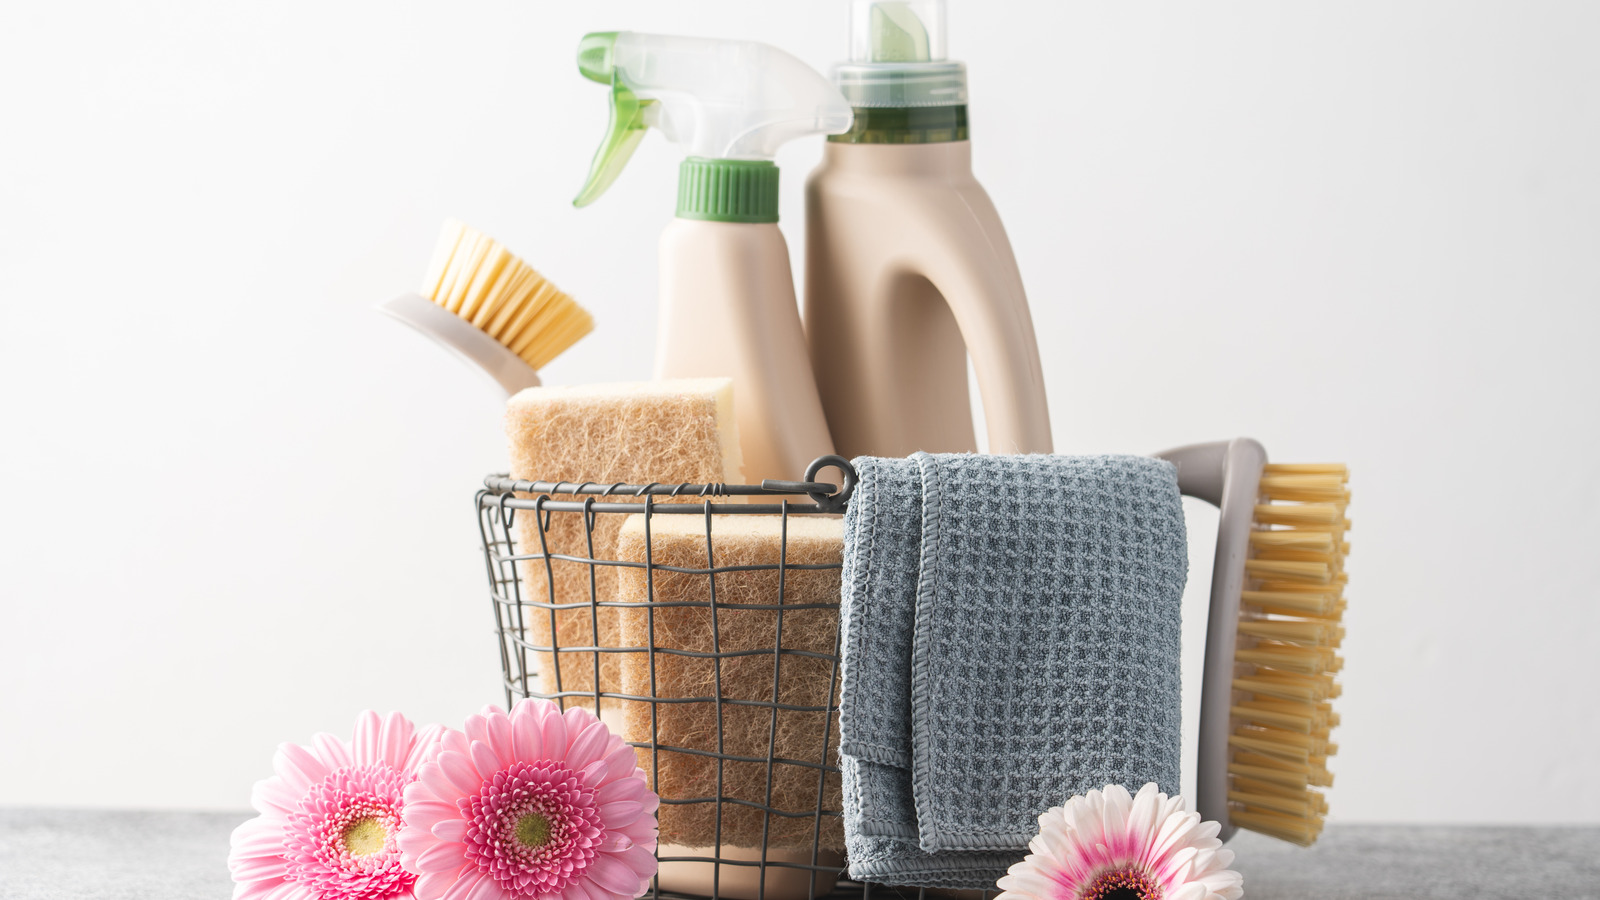 https://www.housedigest.com/img/gallery/the-best-spring-cleaning-hacks-from-tiktok-that-will-get-your-home-fresh-in-no-time/l-intro-1680364759.jpg